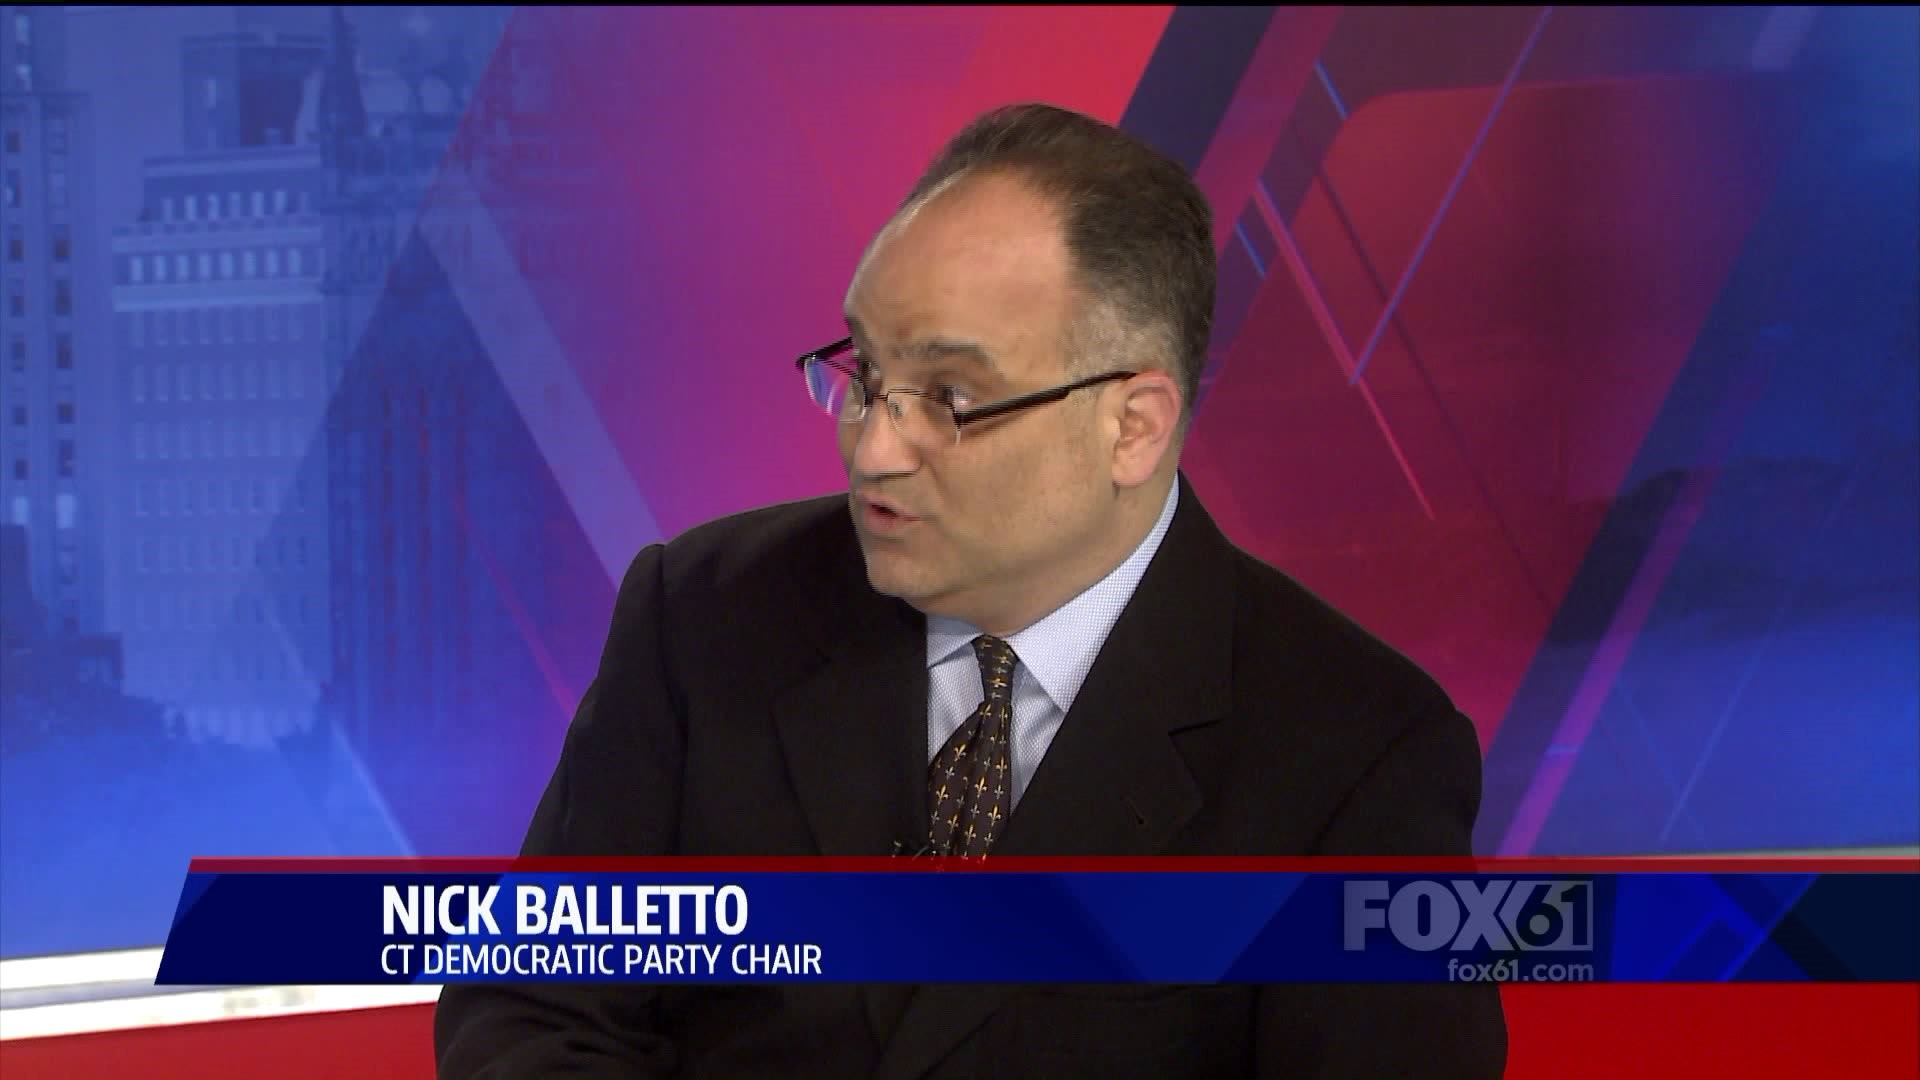 Sitting down with Dem. State Chairman Nick Balletto